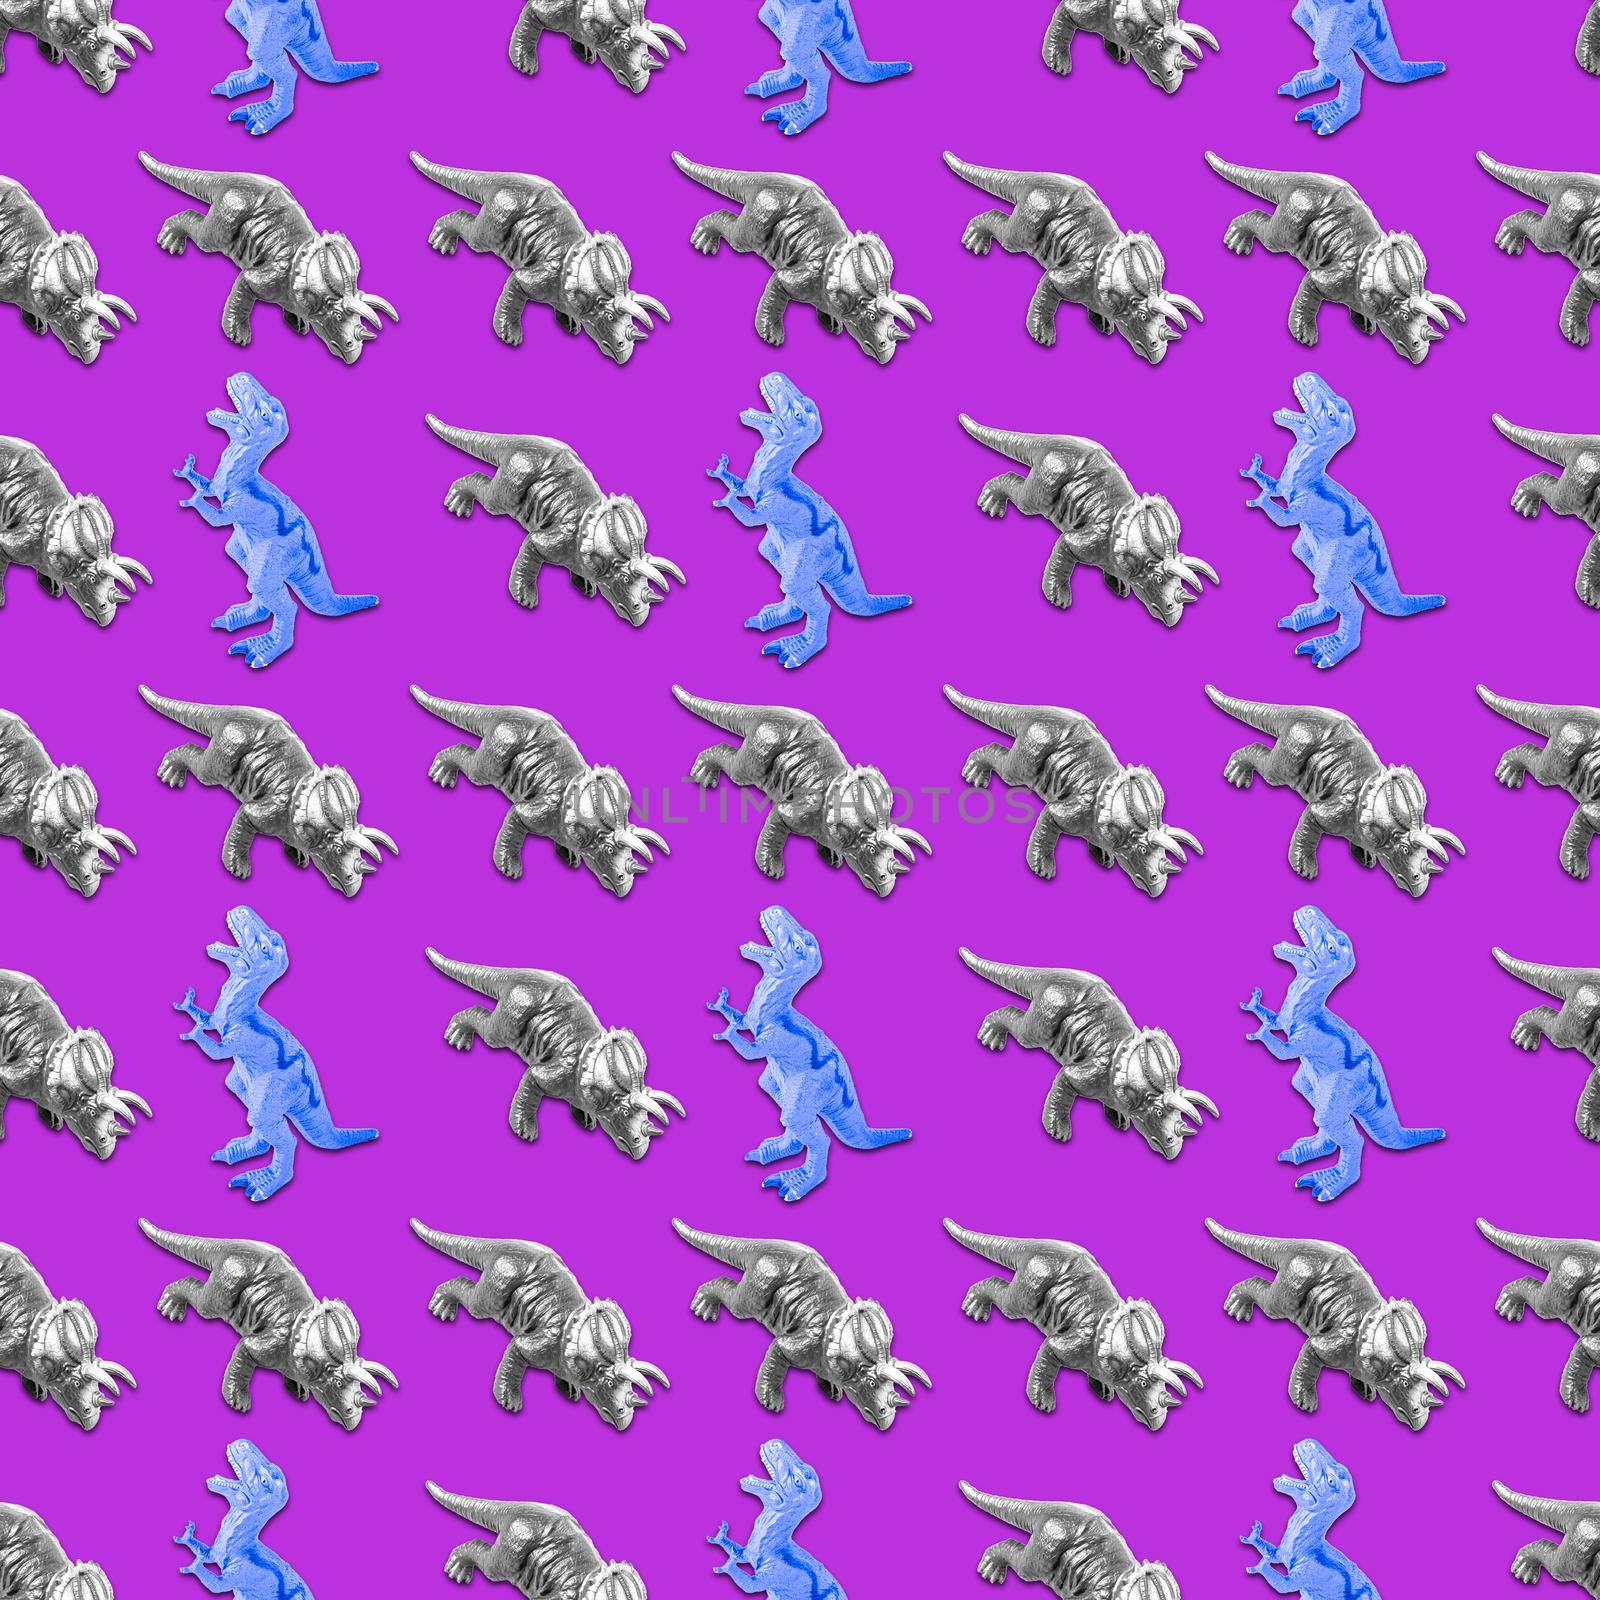 Creative seamless dinosaur pattern on purple background. Abstract art background by bySergPo